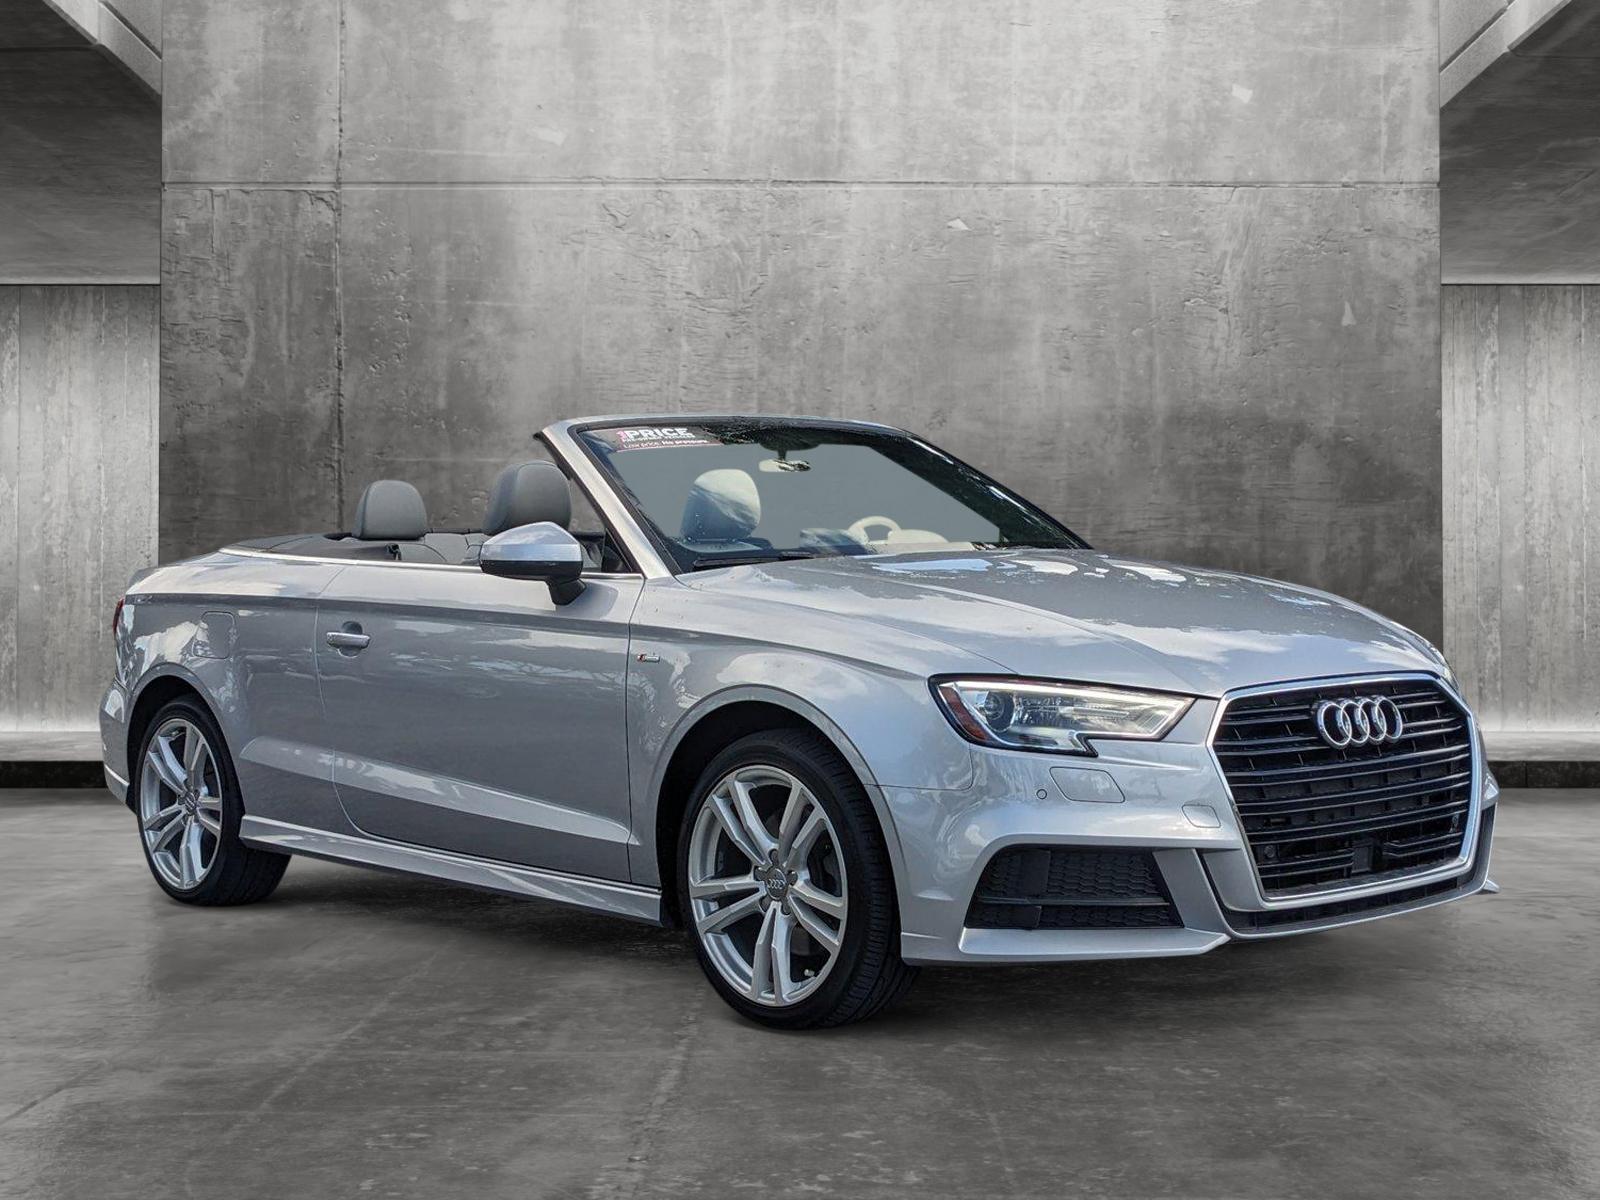 2018 Audi A3 Cabriolet Vehicle Photo in GREENACRES, FL 33463-3207